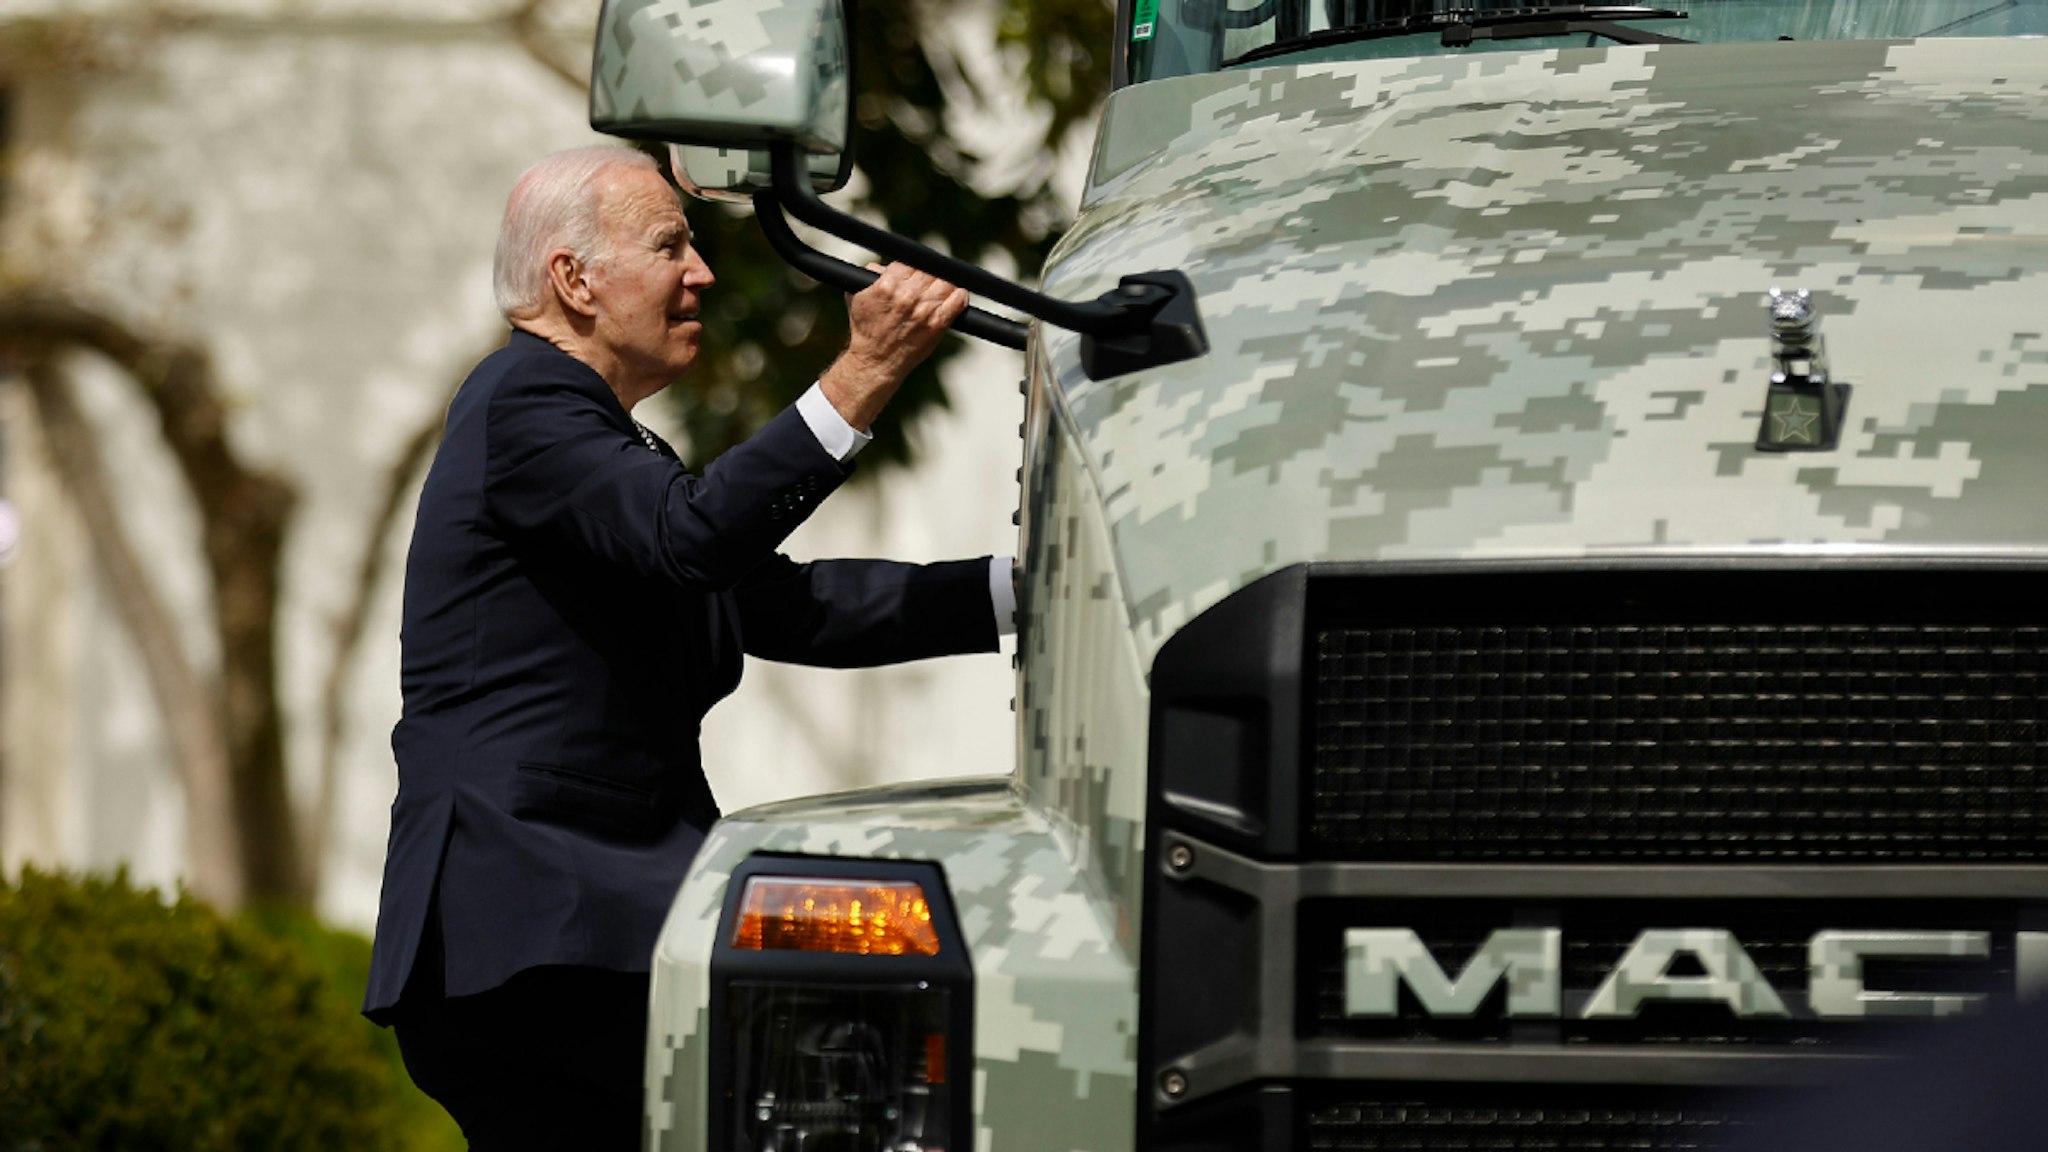 WASHINGTON, DC - APRIL 04: U.S. President Joe Biden climbs onto a semi truck at the conclusion of an event highlighting his 'Trucking Action Plan' on the South Lawn of the White House on April 04, 2022 in Washington, DC.